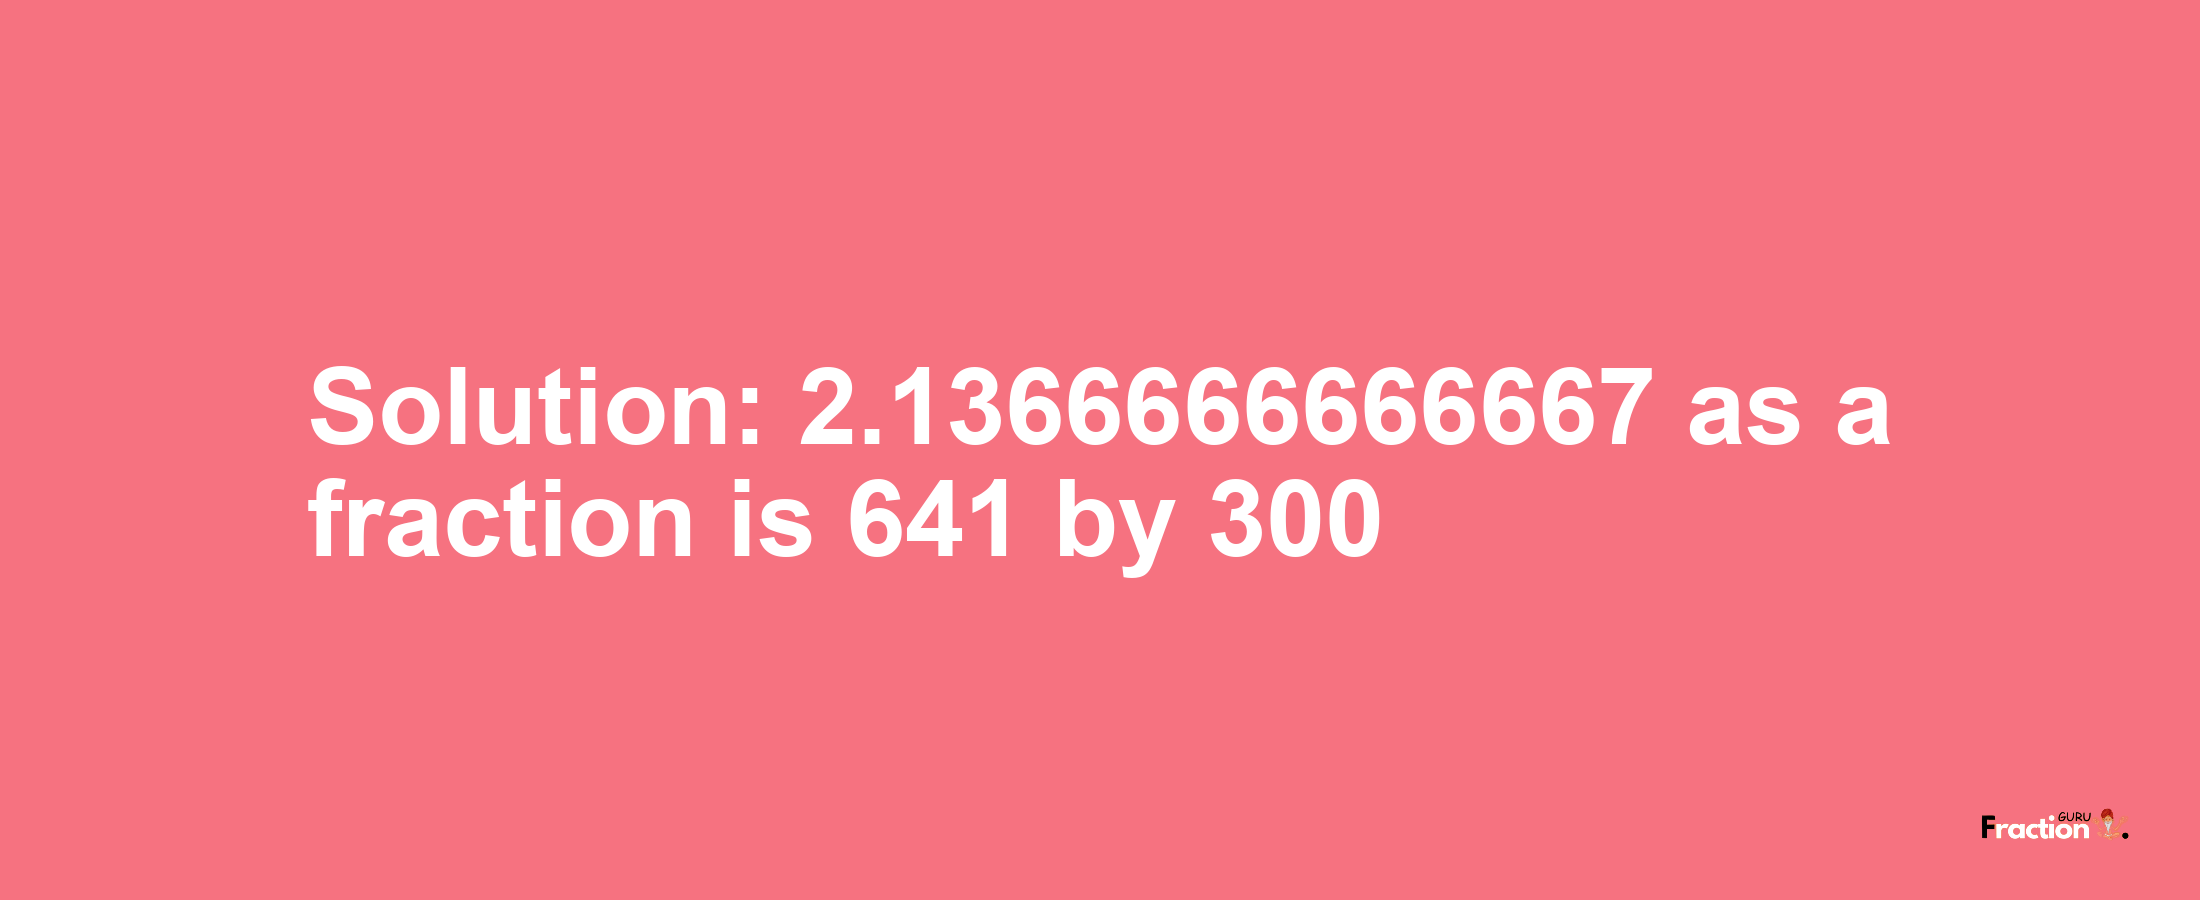 Solution:2.1366666666667 as a fraction is 641/300